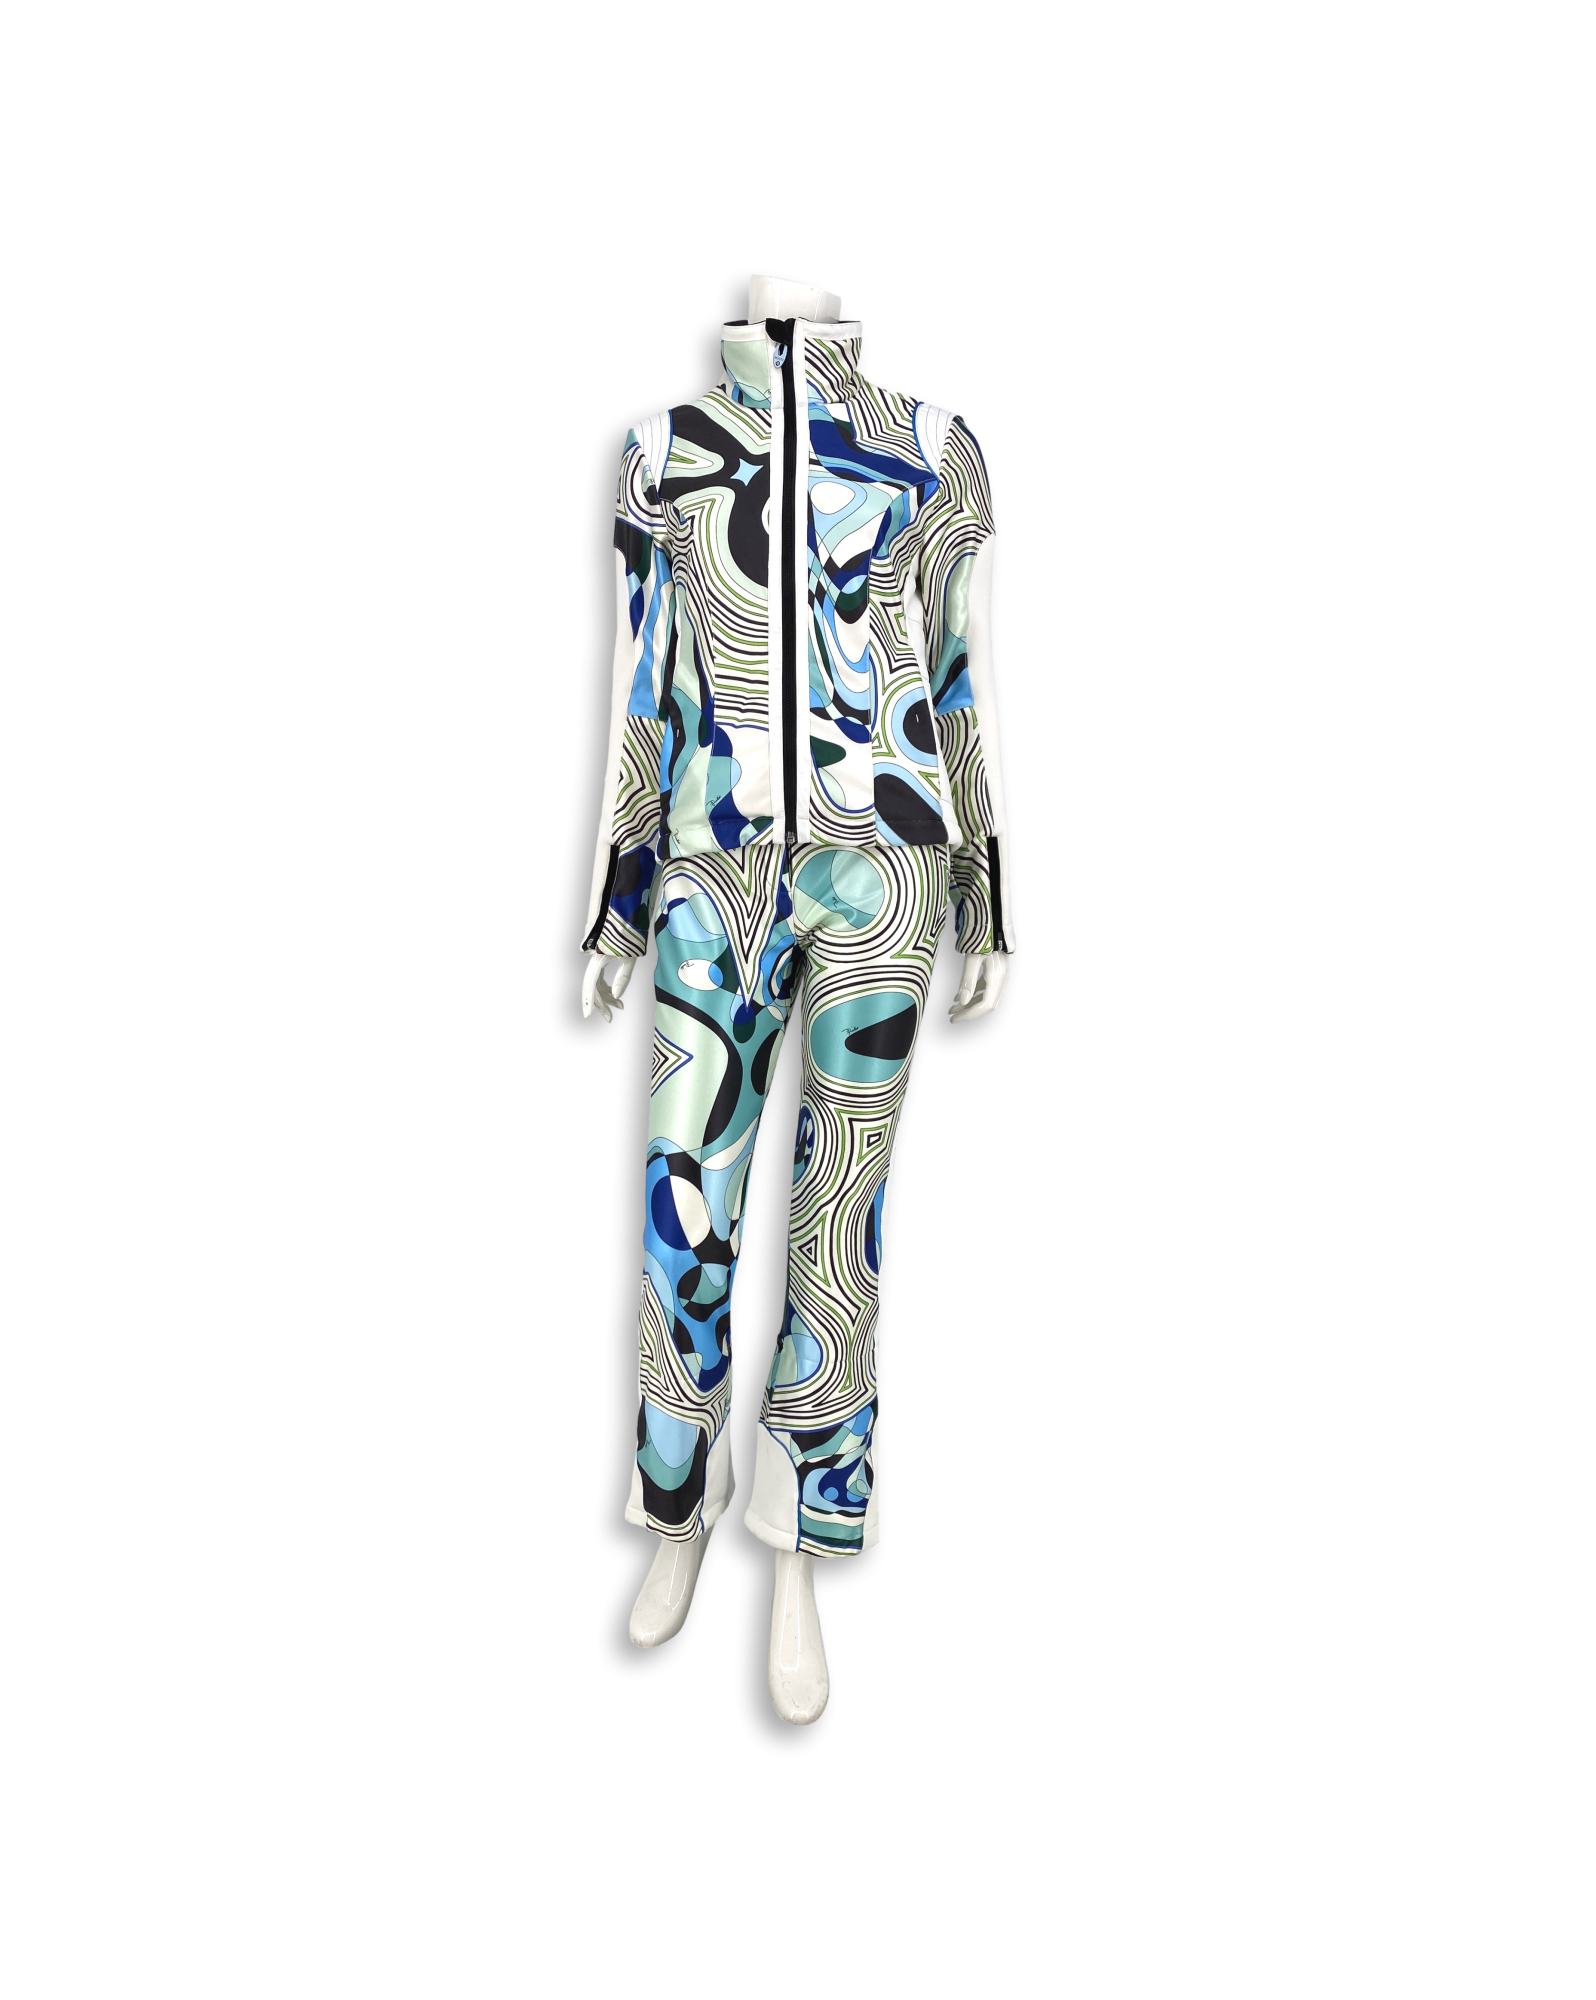 EMILIO PUCCI for Rossignol Hooded Ski Jacket - More Than You Can Imagine